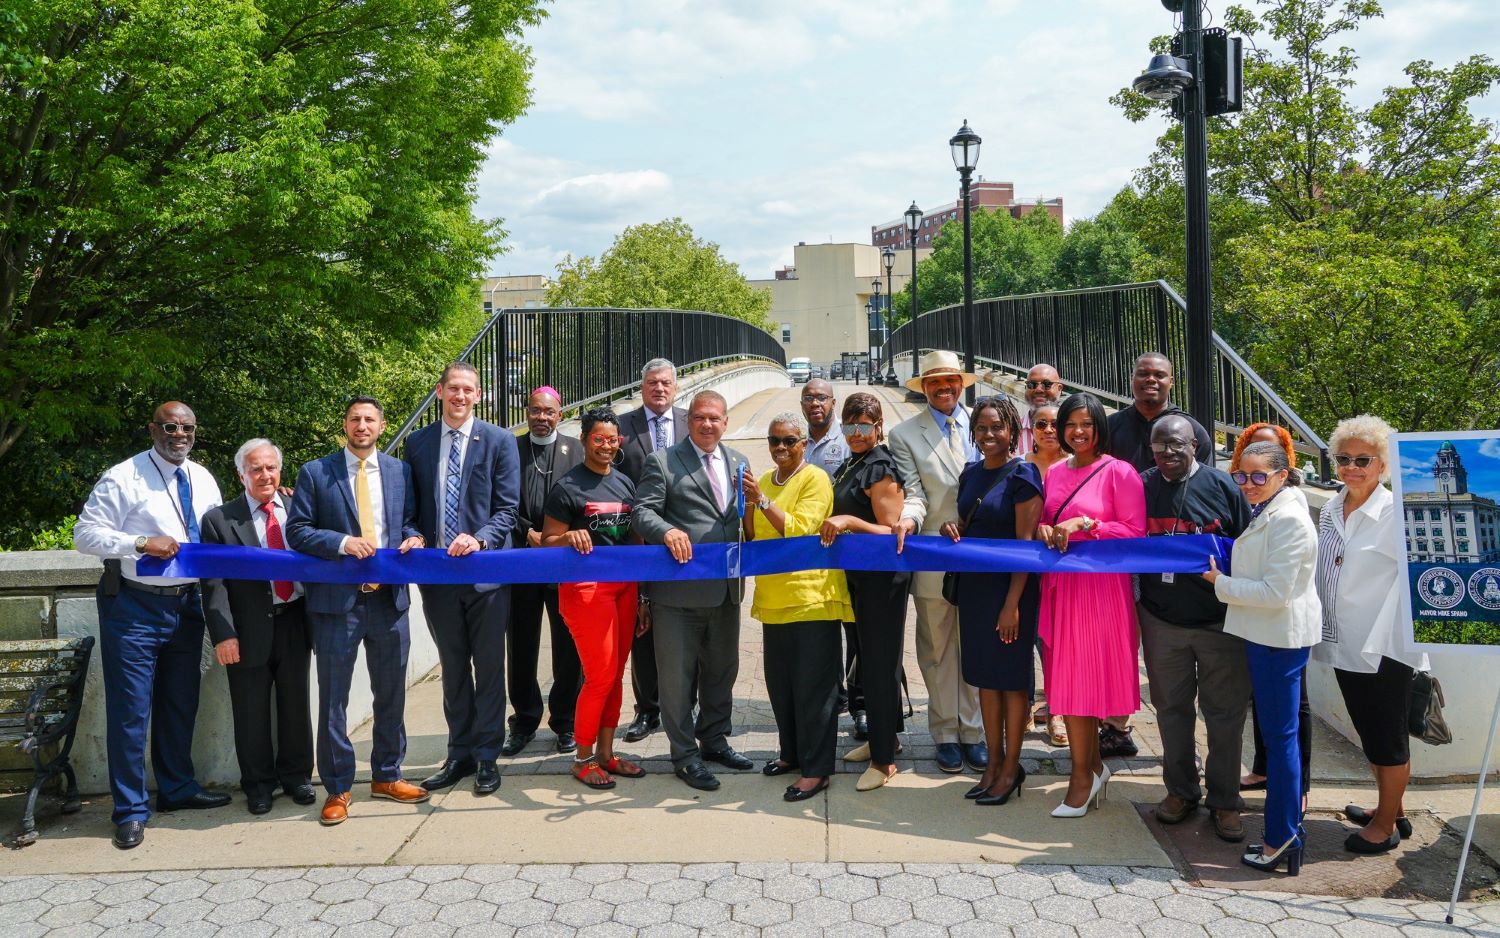 City of Yonkers kicked off a new project